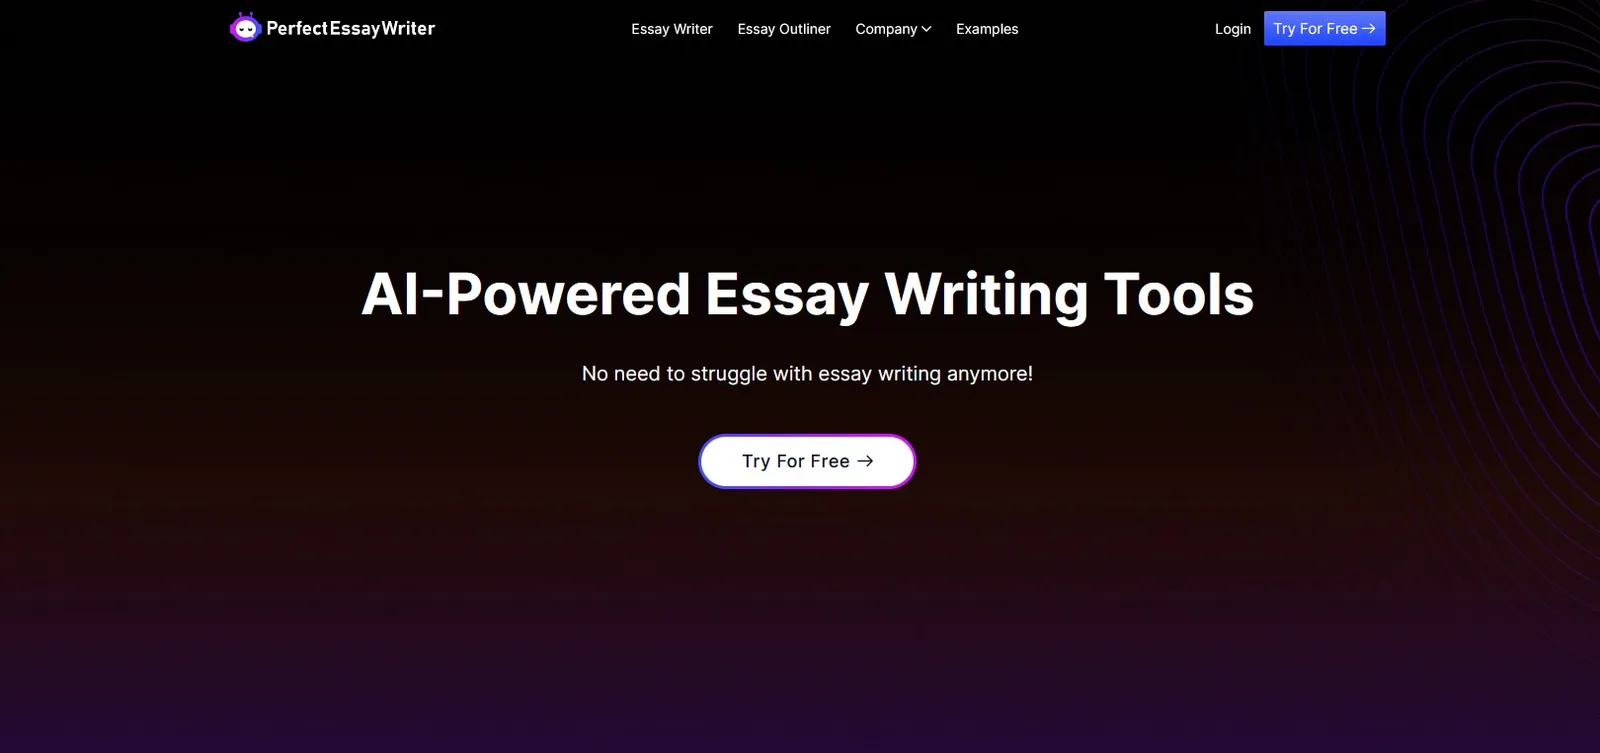 PerfectEssayWriter.ai Pricing - Is It Worth the Investment?